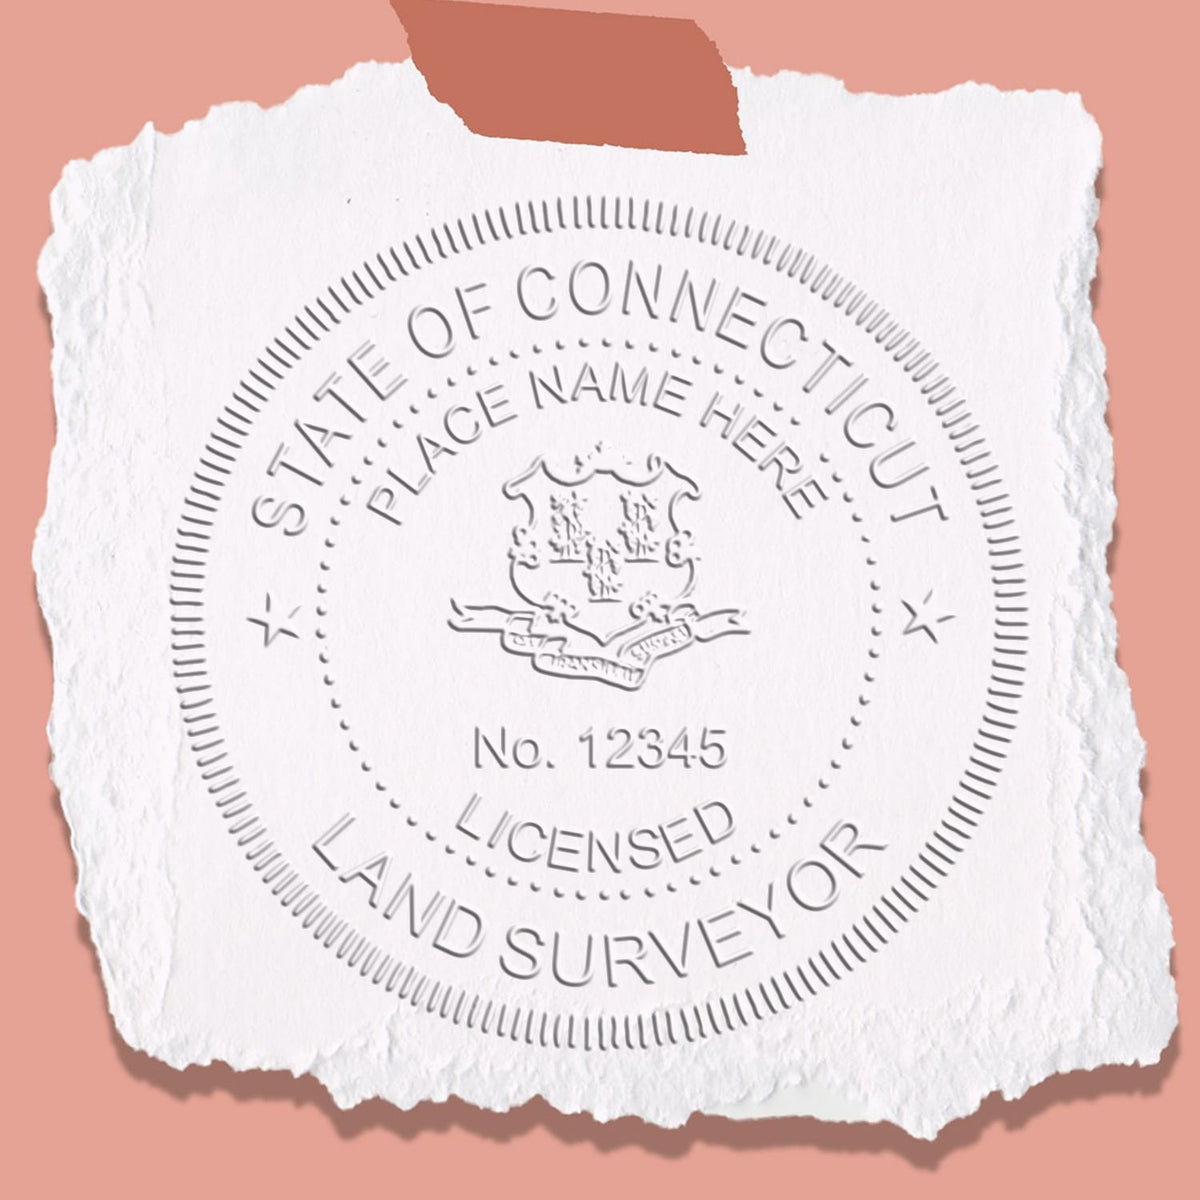 A stamped impression of the Long Reach Connecticut Land Surveyor Seal in this stylish lifestyle photo, setting the tone for a unique and personalized product.